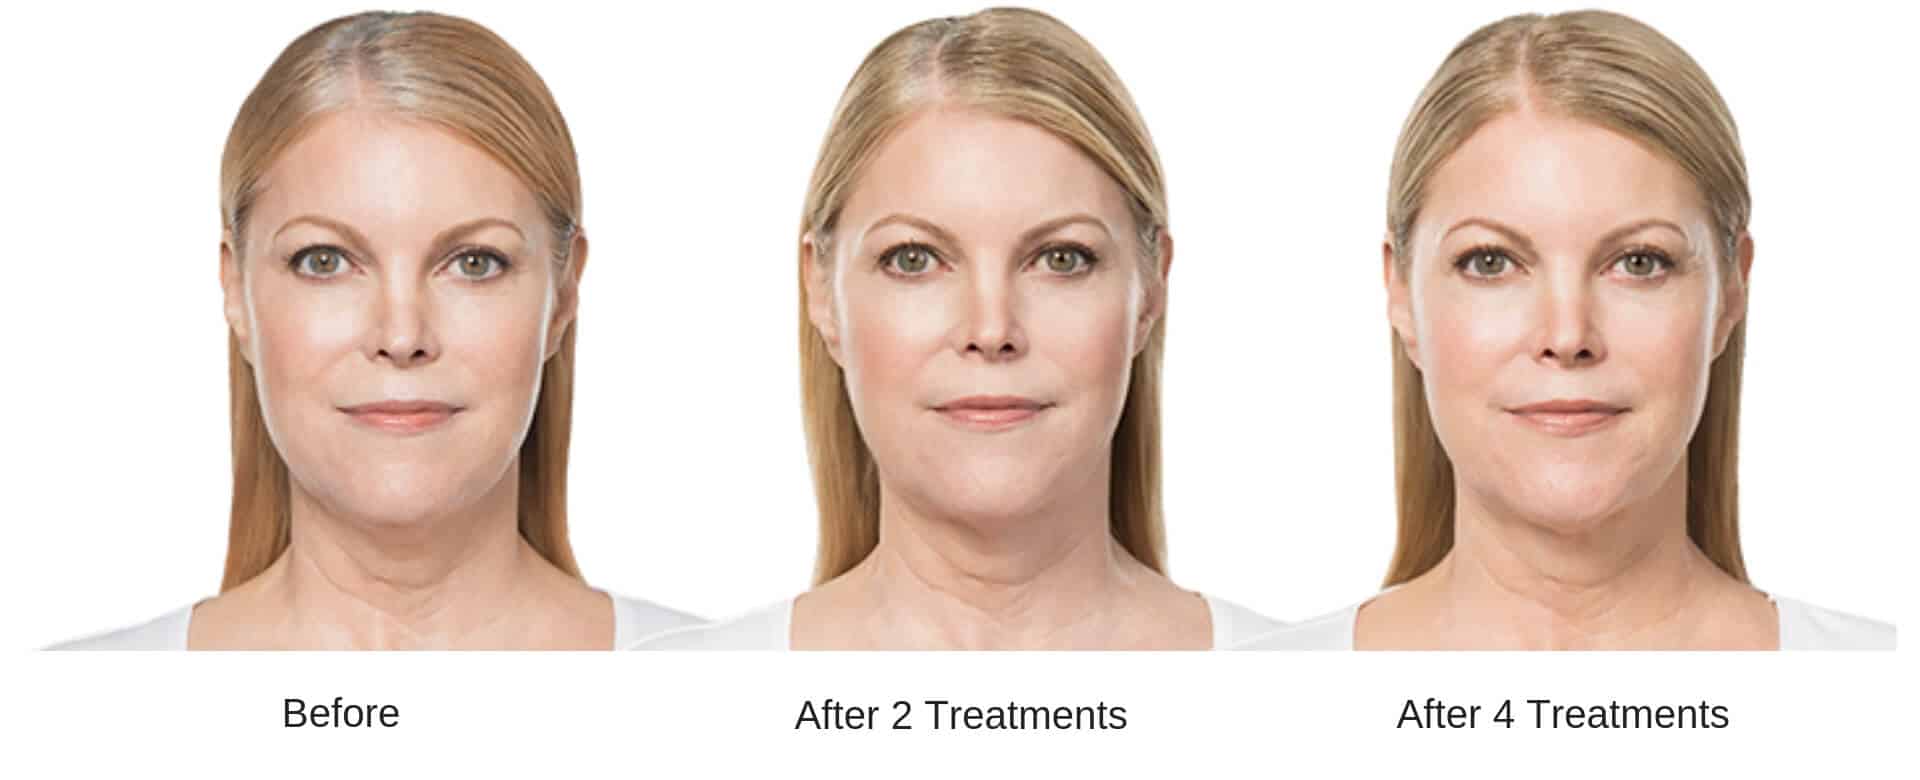 Woman's before and after results with Kybella.